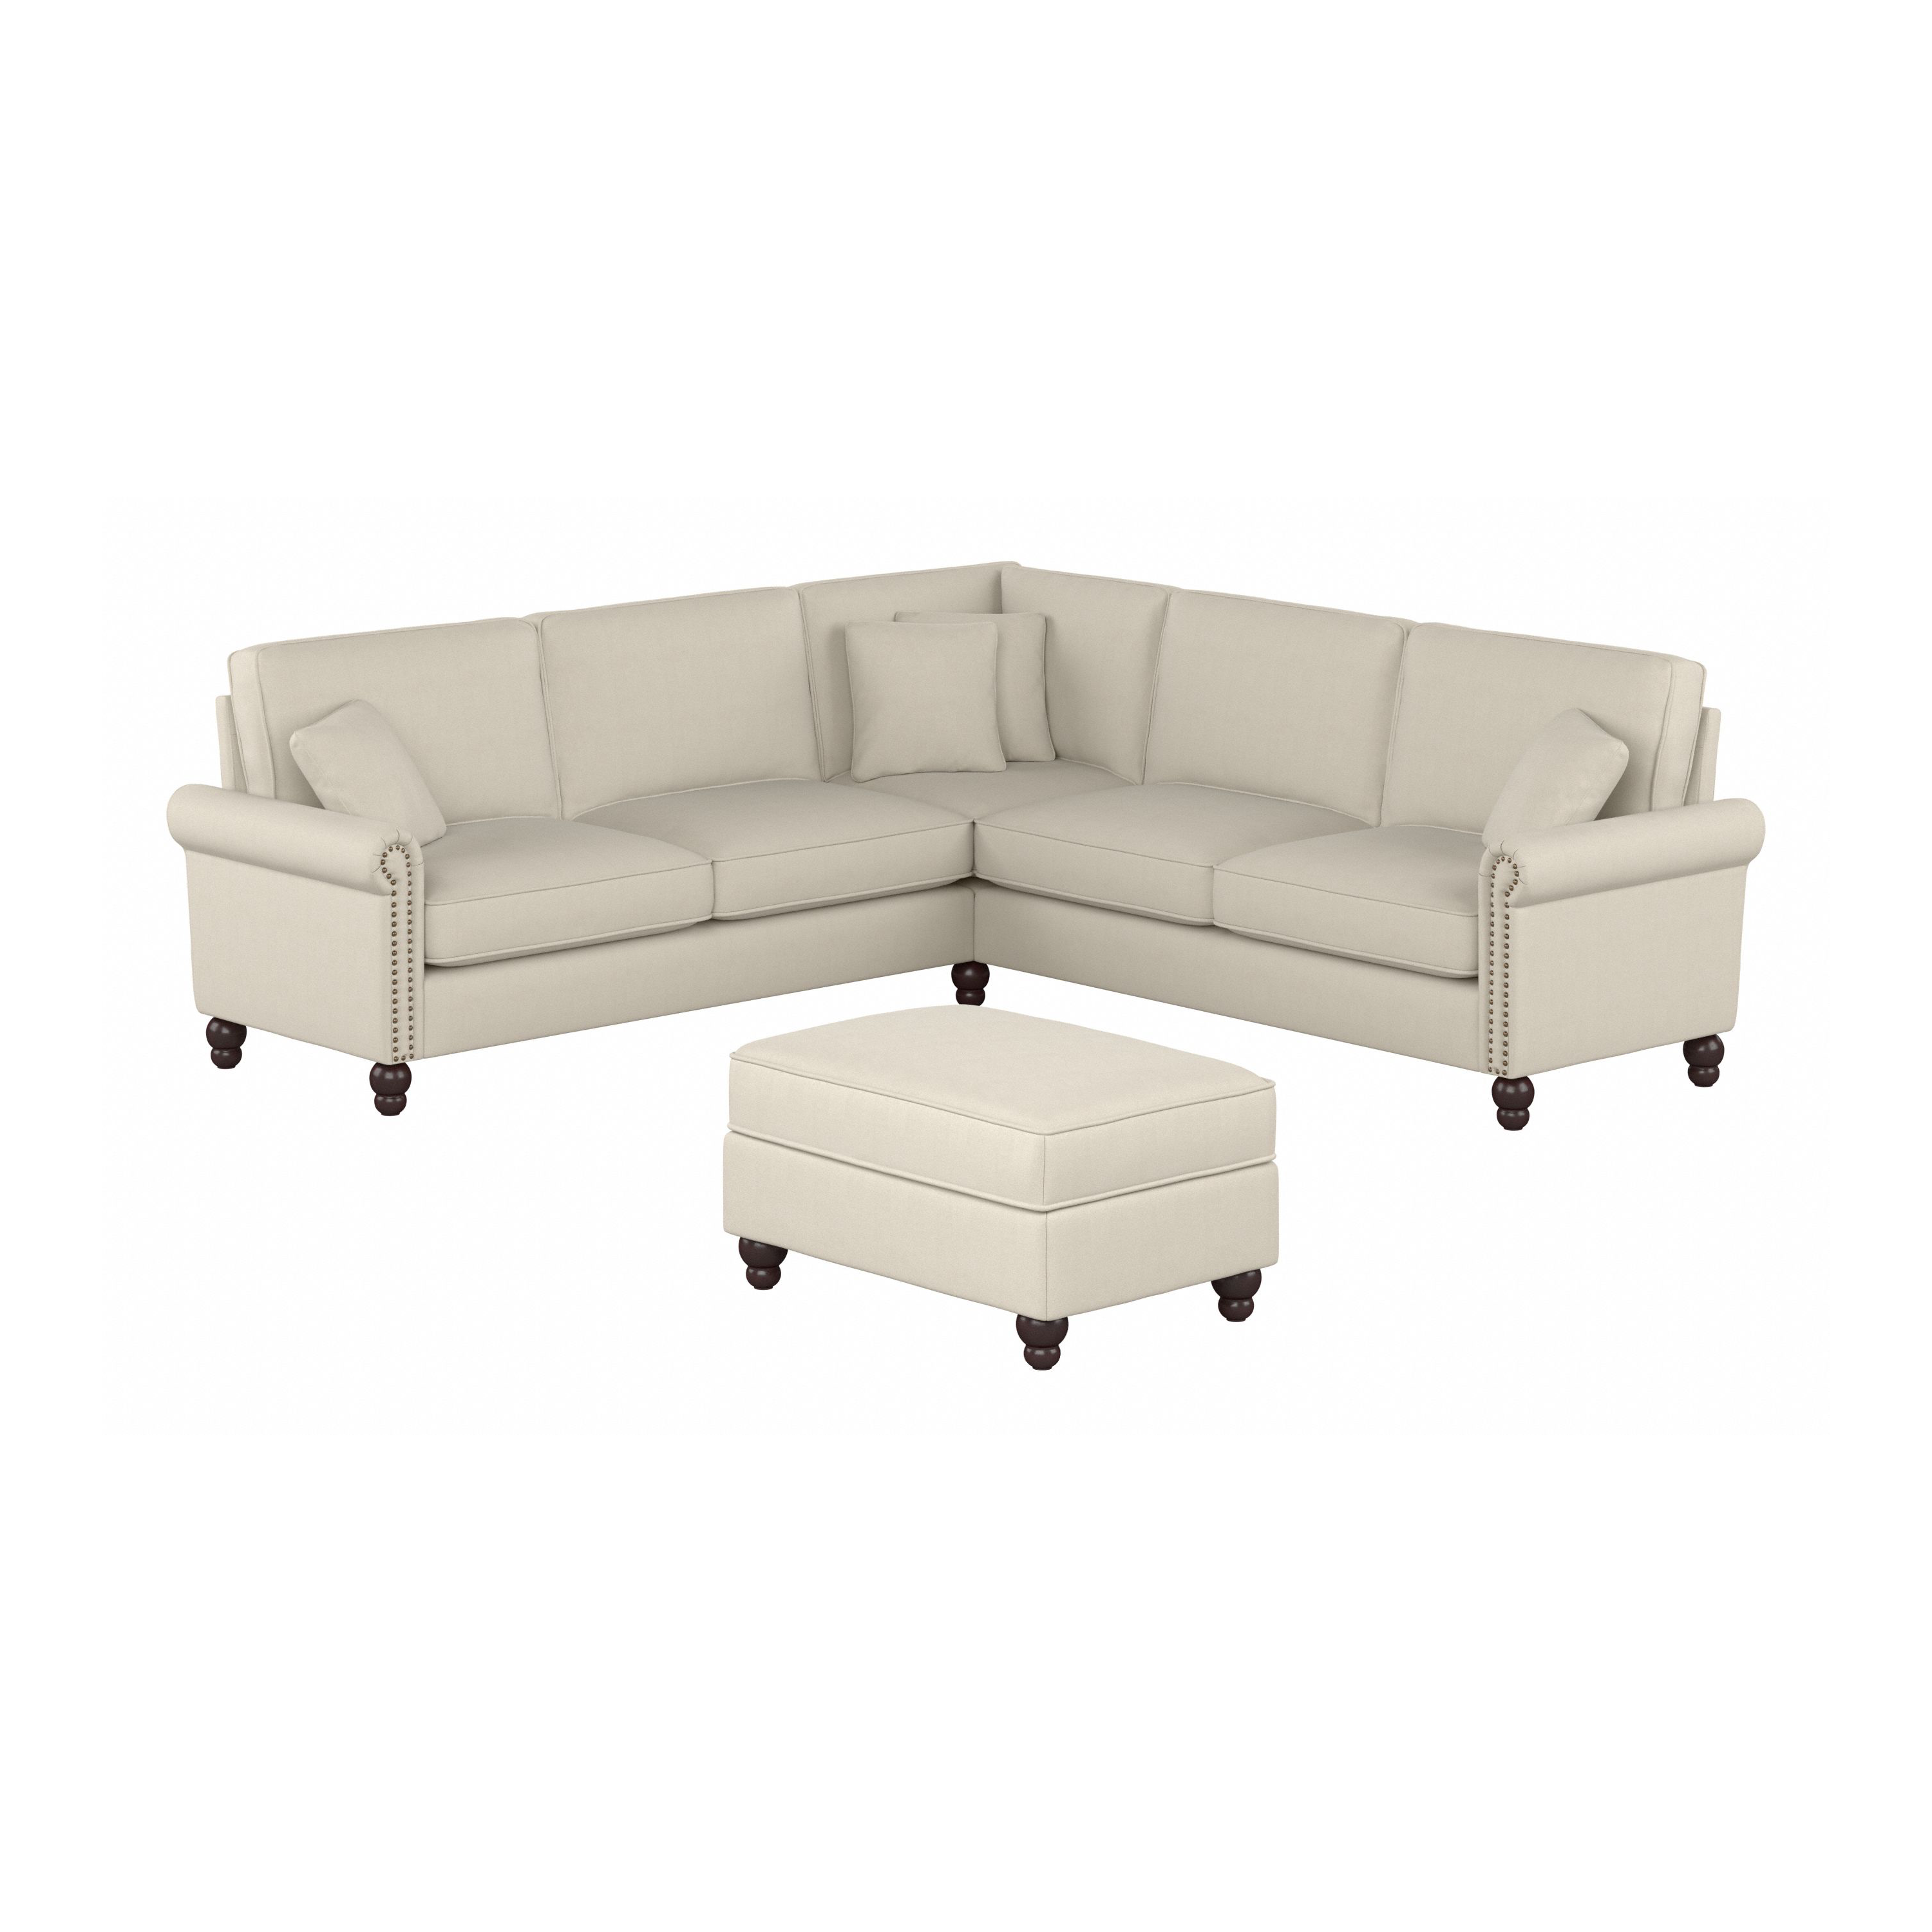 Shop Bush Furniture Coventry 99W L Shaped Sectional Couch with Ottoman 02 CVN003CRH #color_cream herringbone fabric